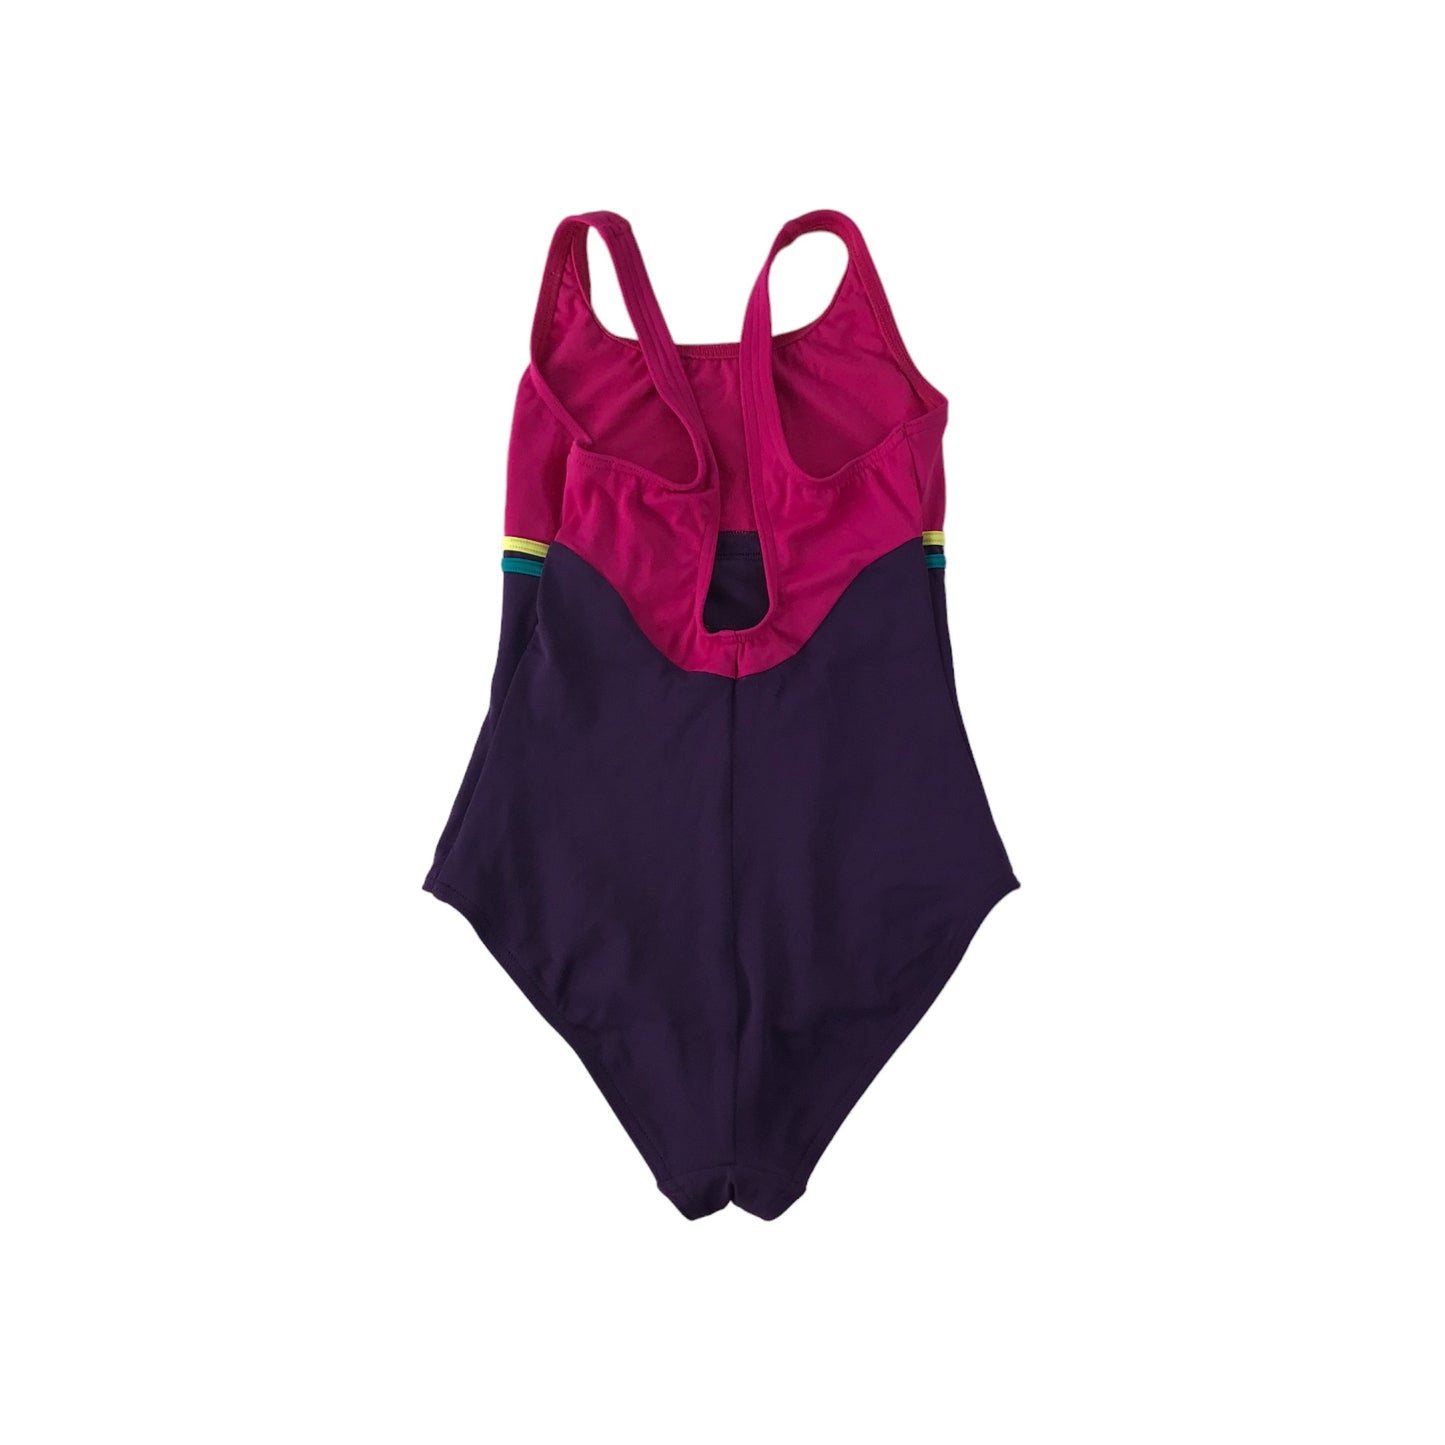 Decathlon Nabaiji Swimsuit Age 11-12 Pink and Purple One Piece Cossie